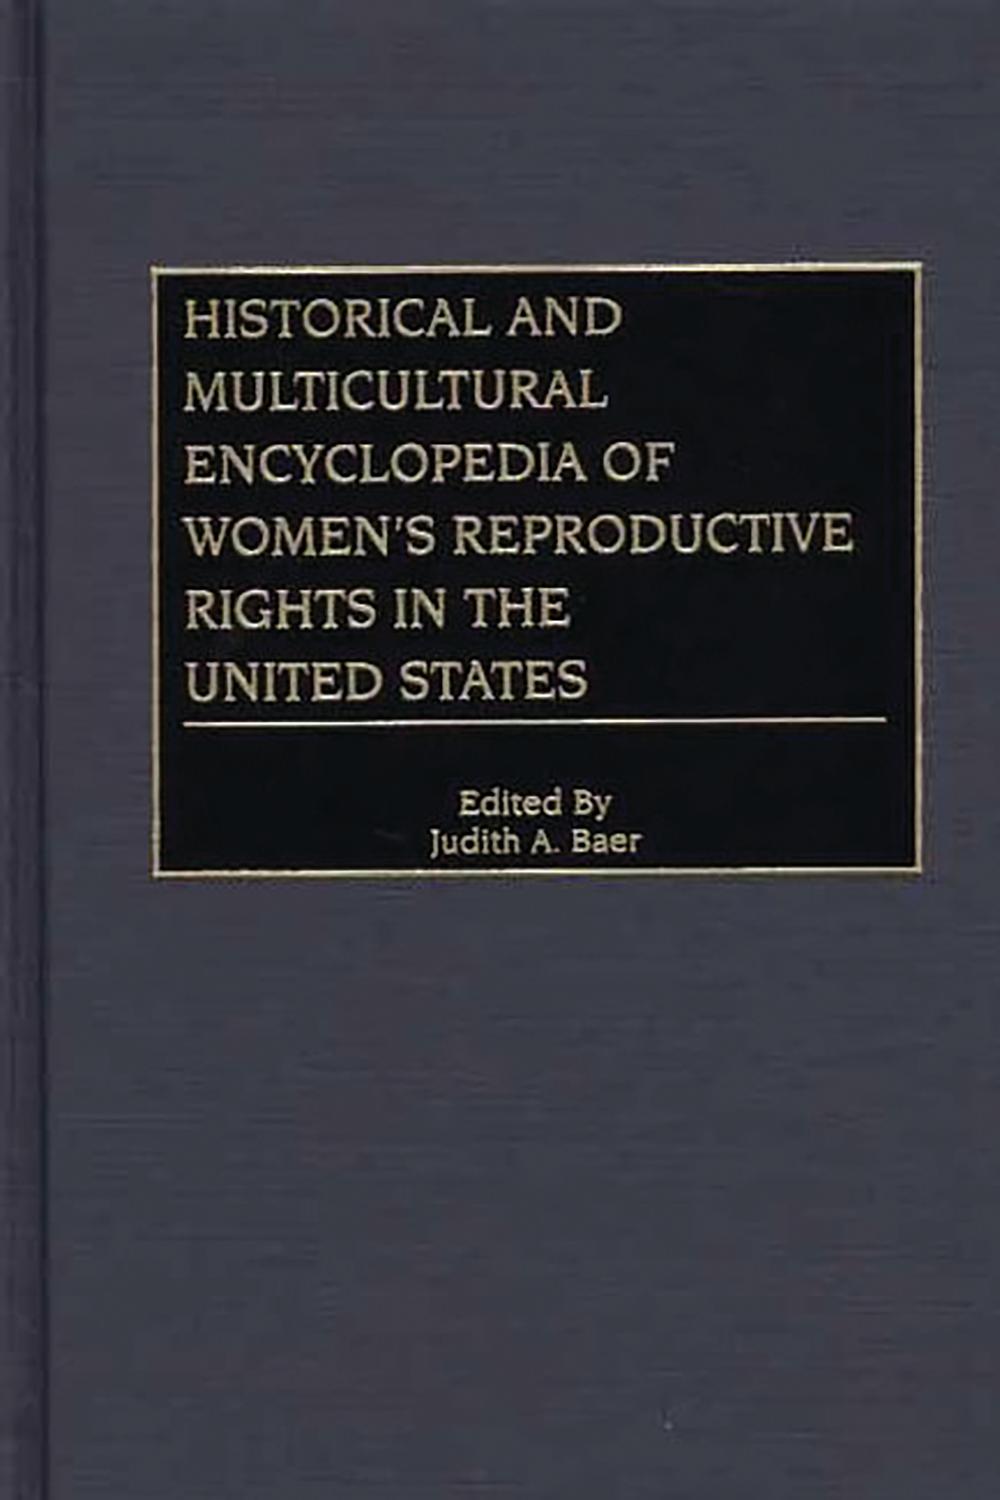 Historical and Multicultural Encyclopedia of Women's Reproductive Rights in the United States - Judith A. Baer